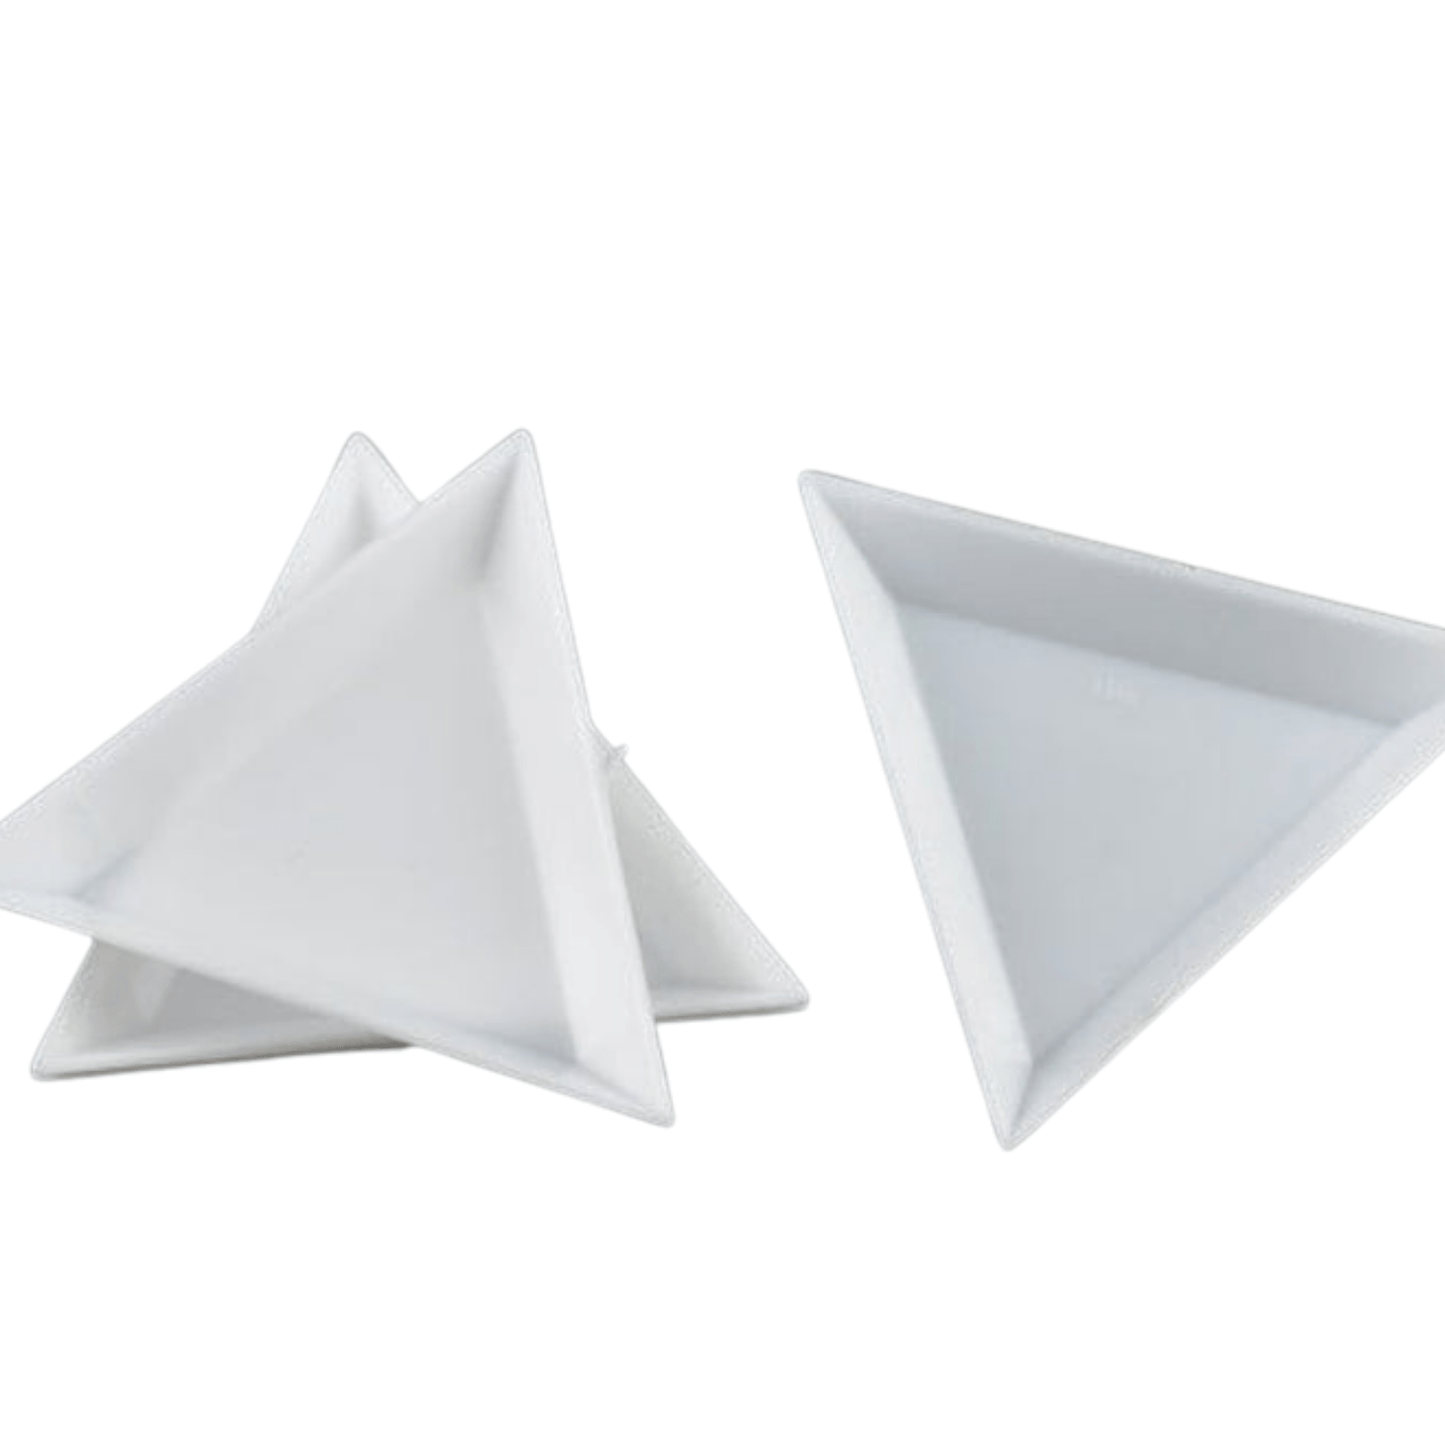 Bling That! Tools White Triangle Plastic Sorting Trays